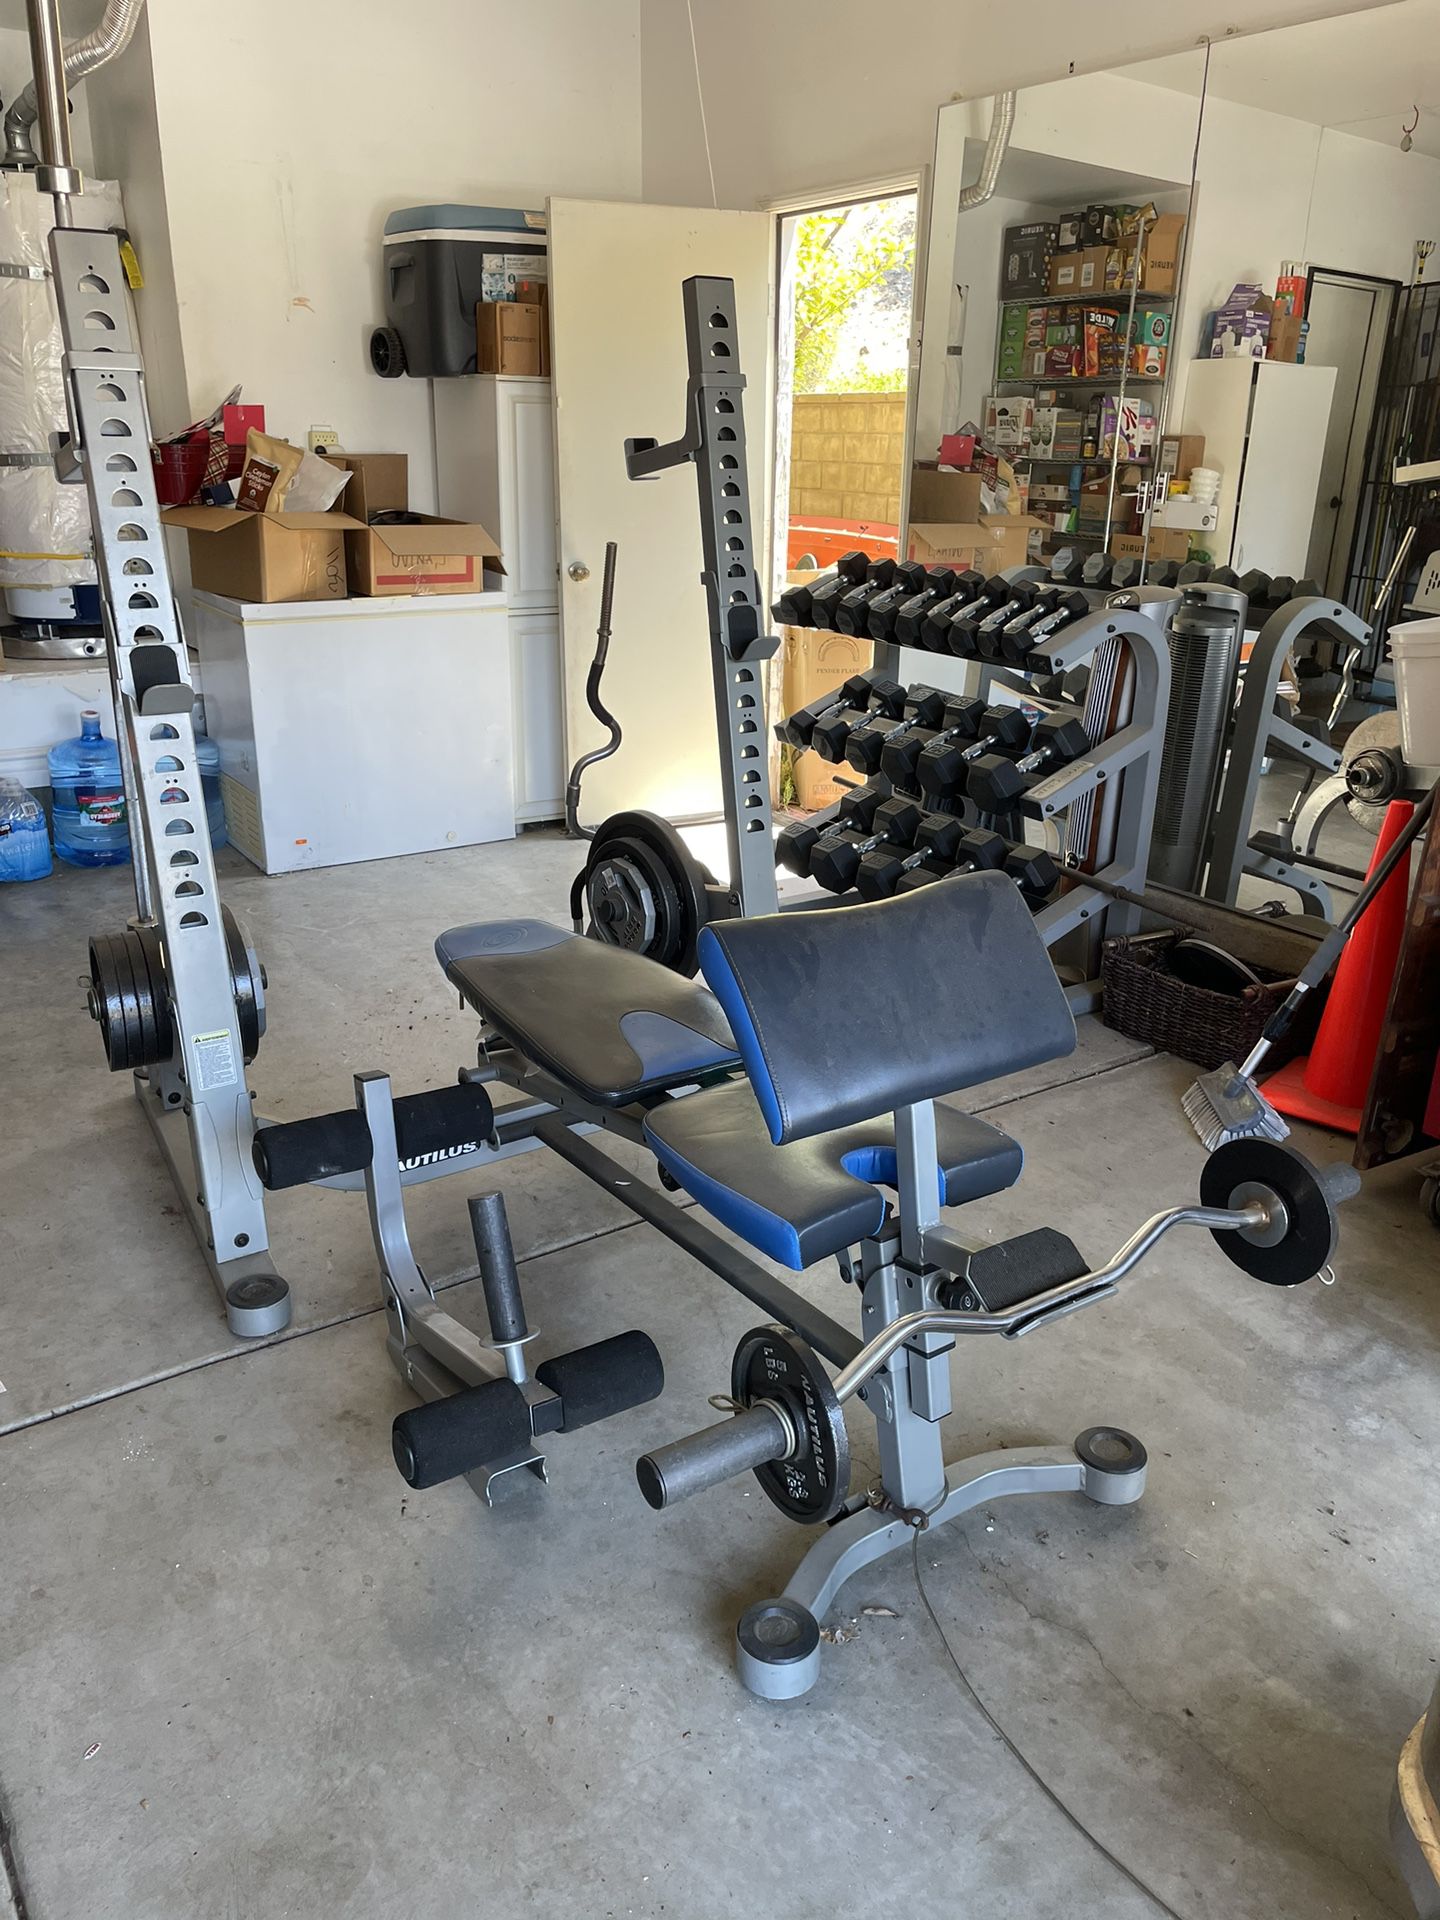 Dumbbell set, Nautilus Weight bench Set, And mirrors